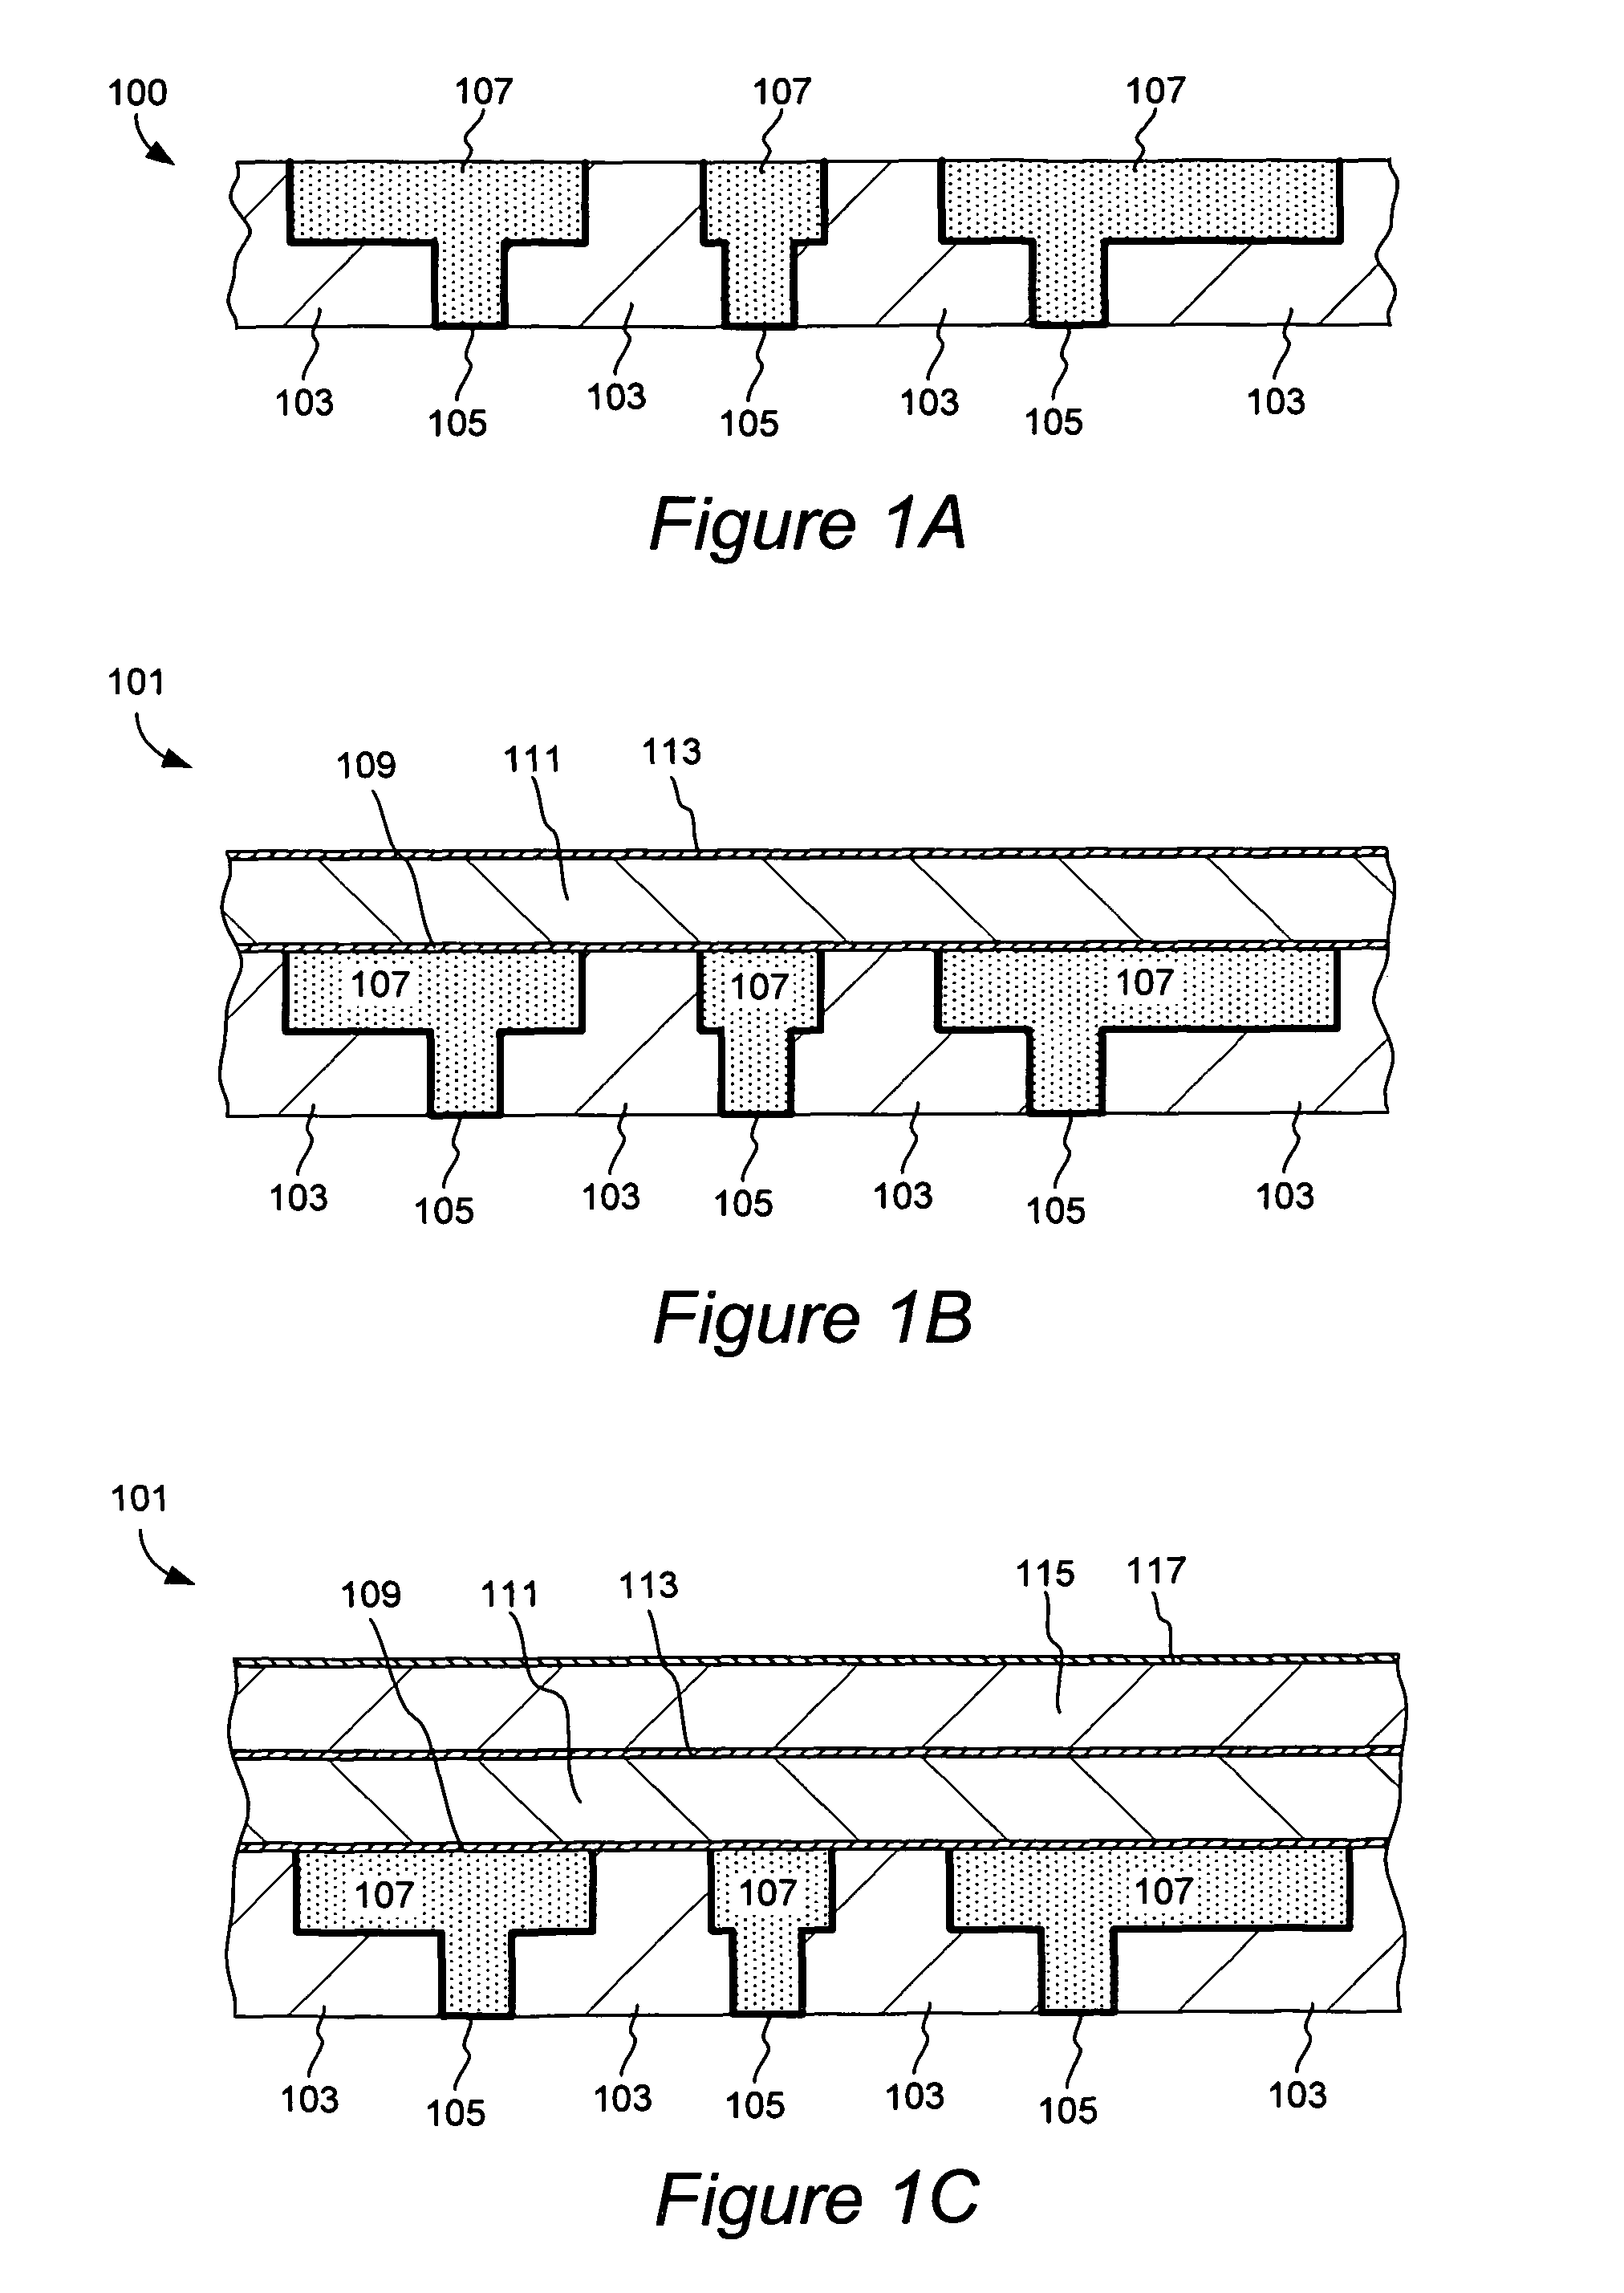 Deposition of doped copper seed layers having improved reliability